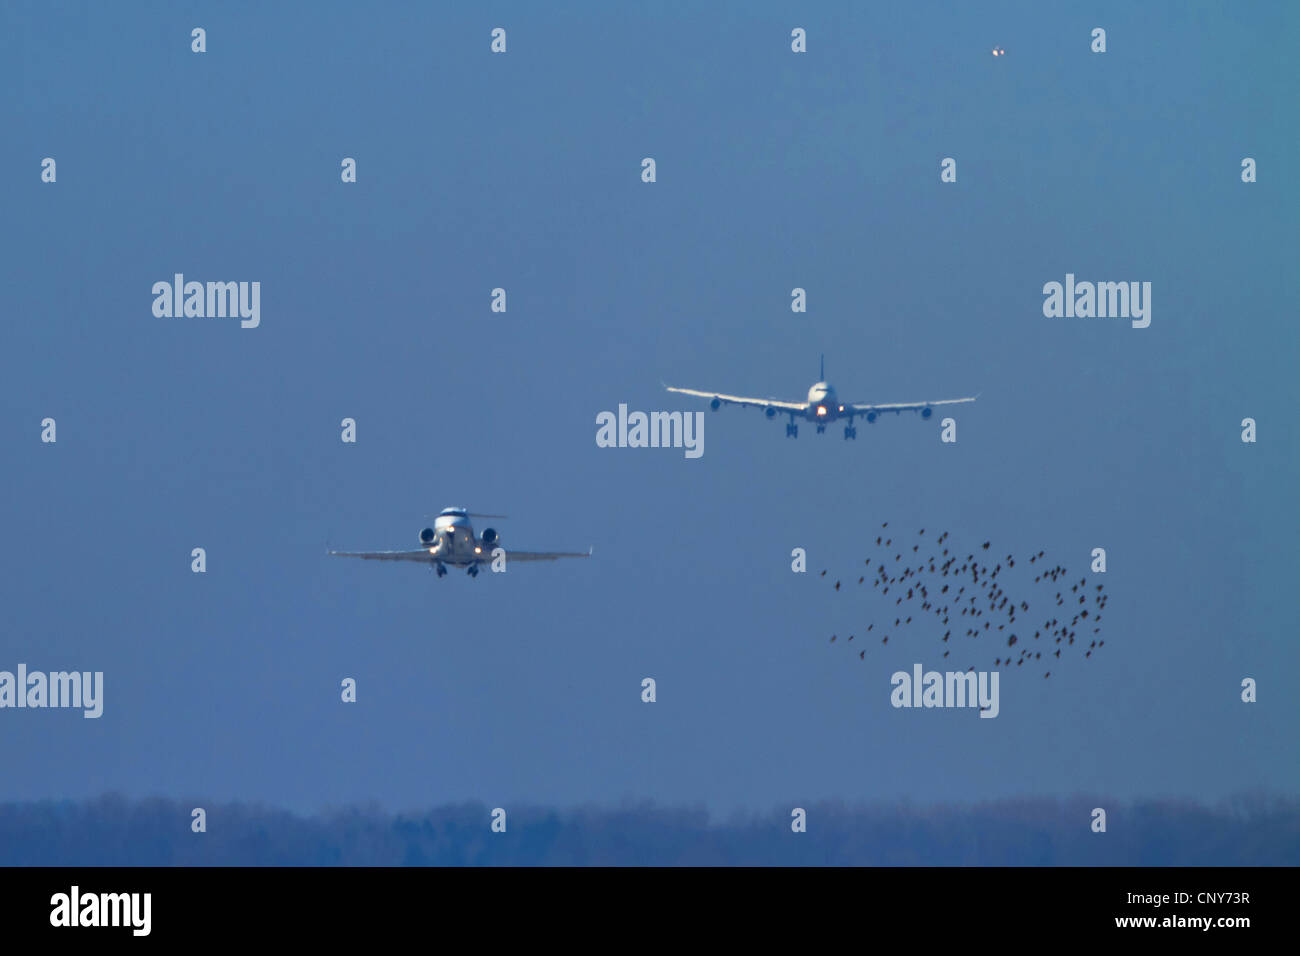 airplanes flying in the sky